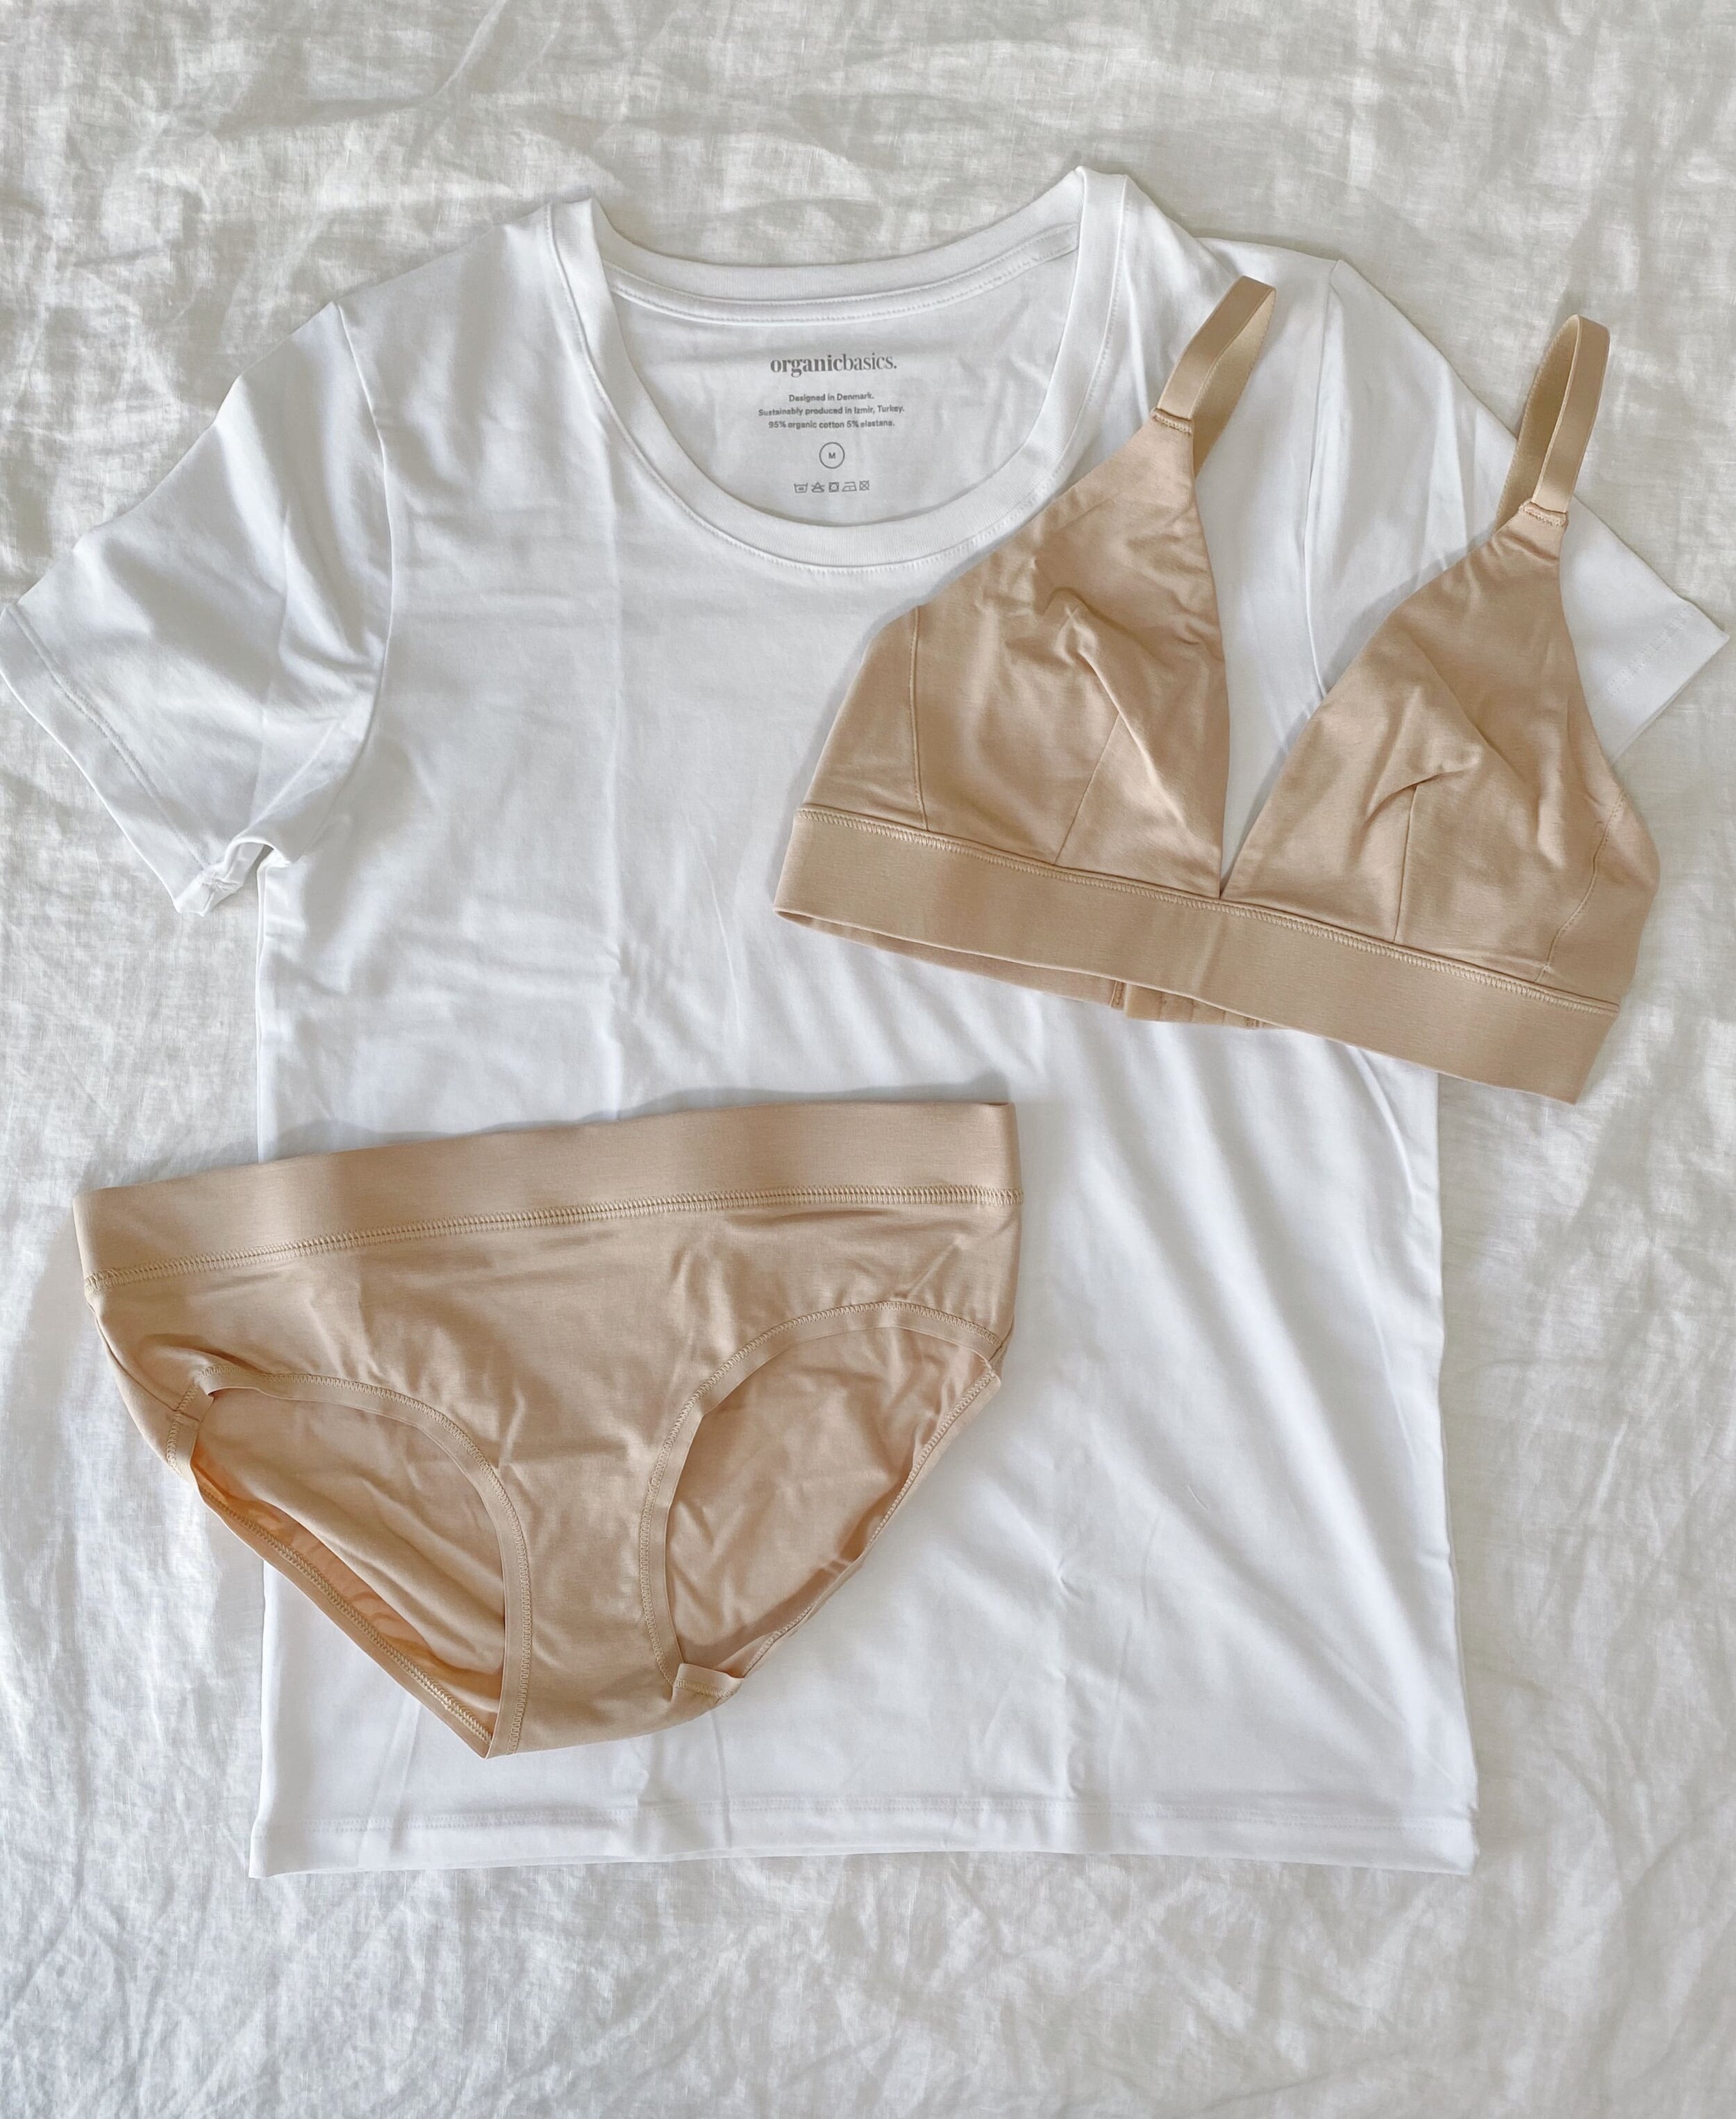 Organic Basics Review: Organic Cotton Underwear and Shirt — Fairly Curated